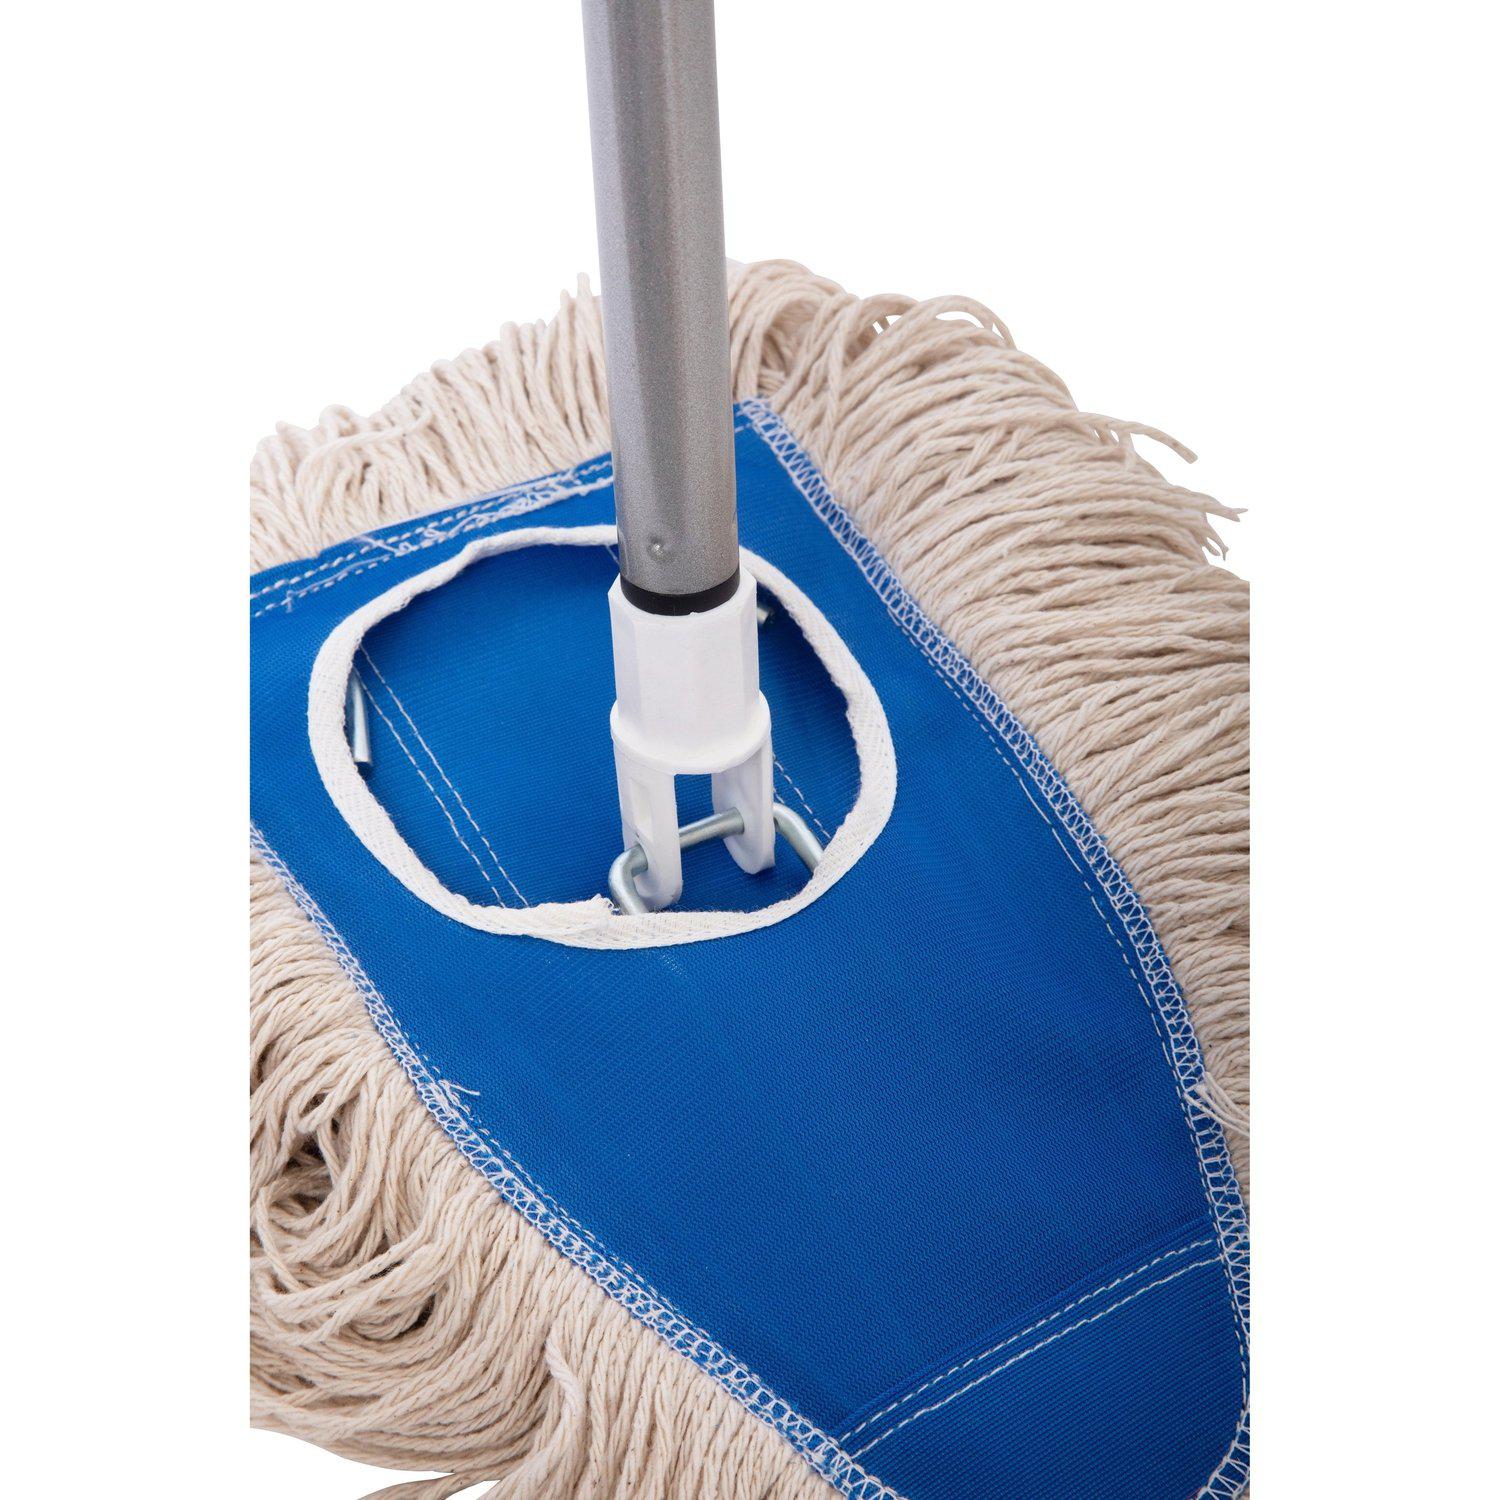  Fuller Brush Dry Mop - Washable Cotton Mop Head with